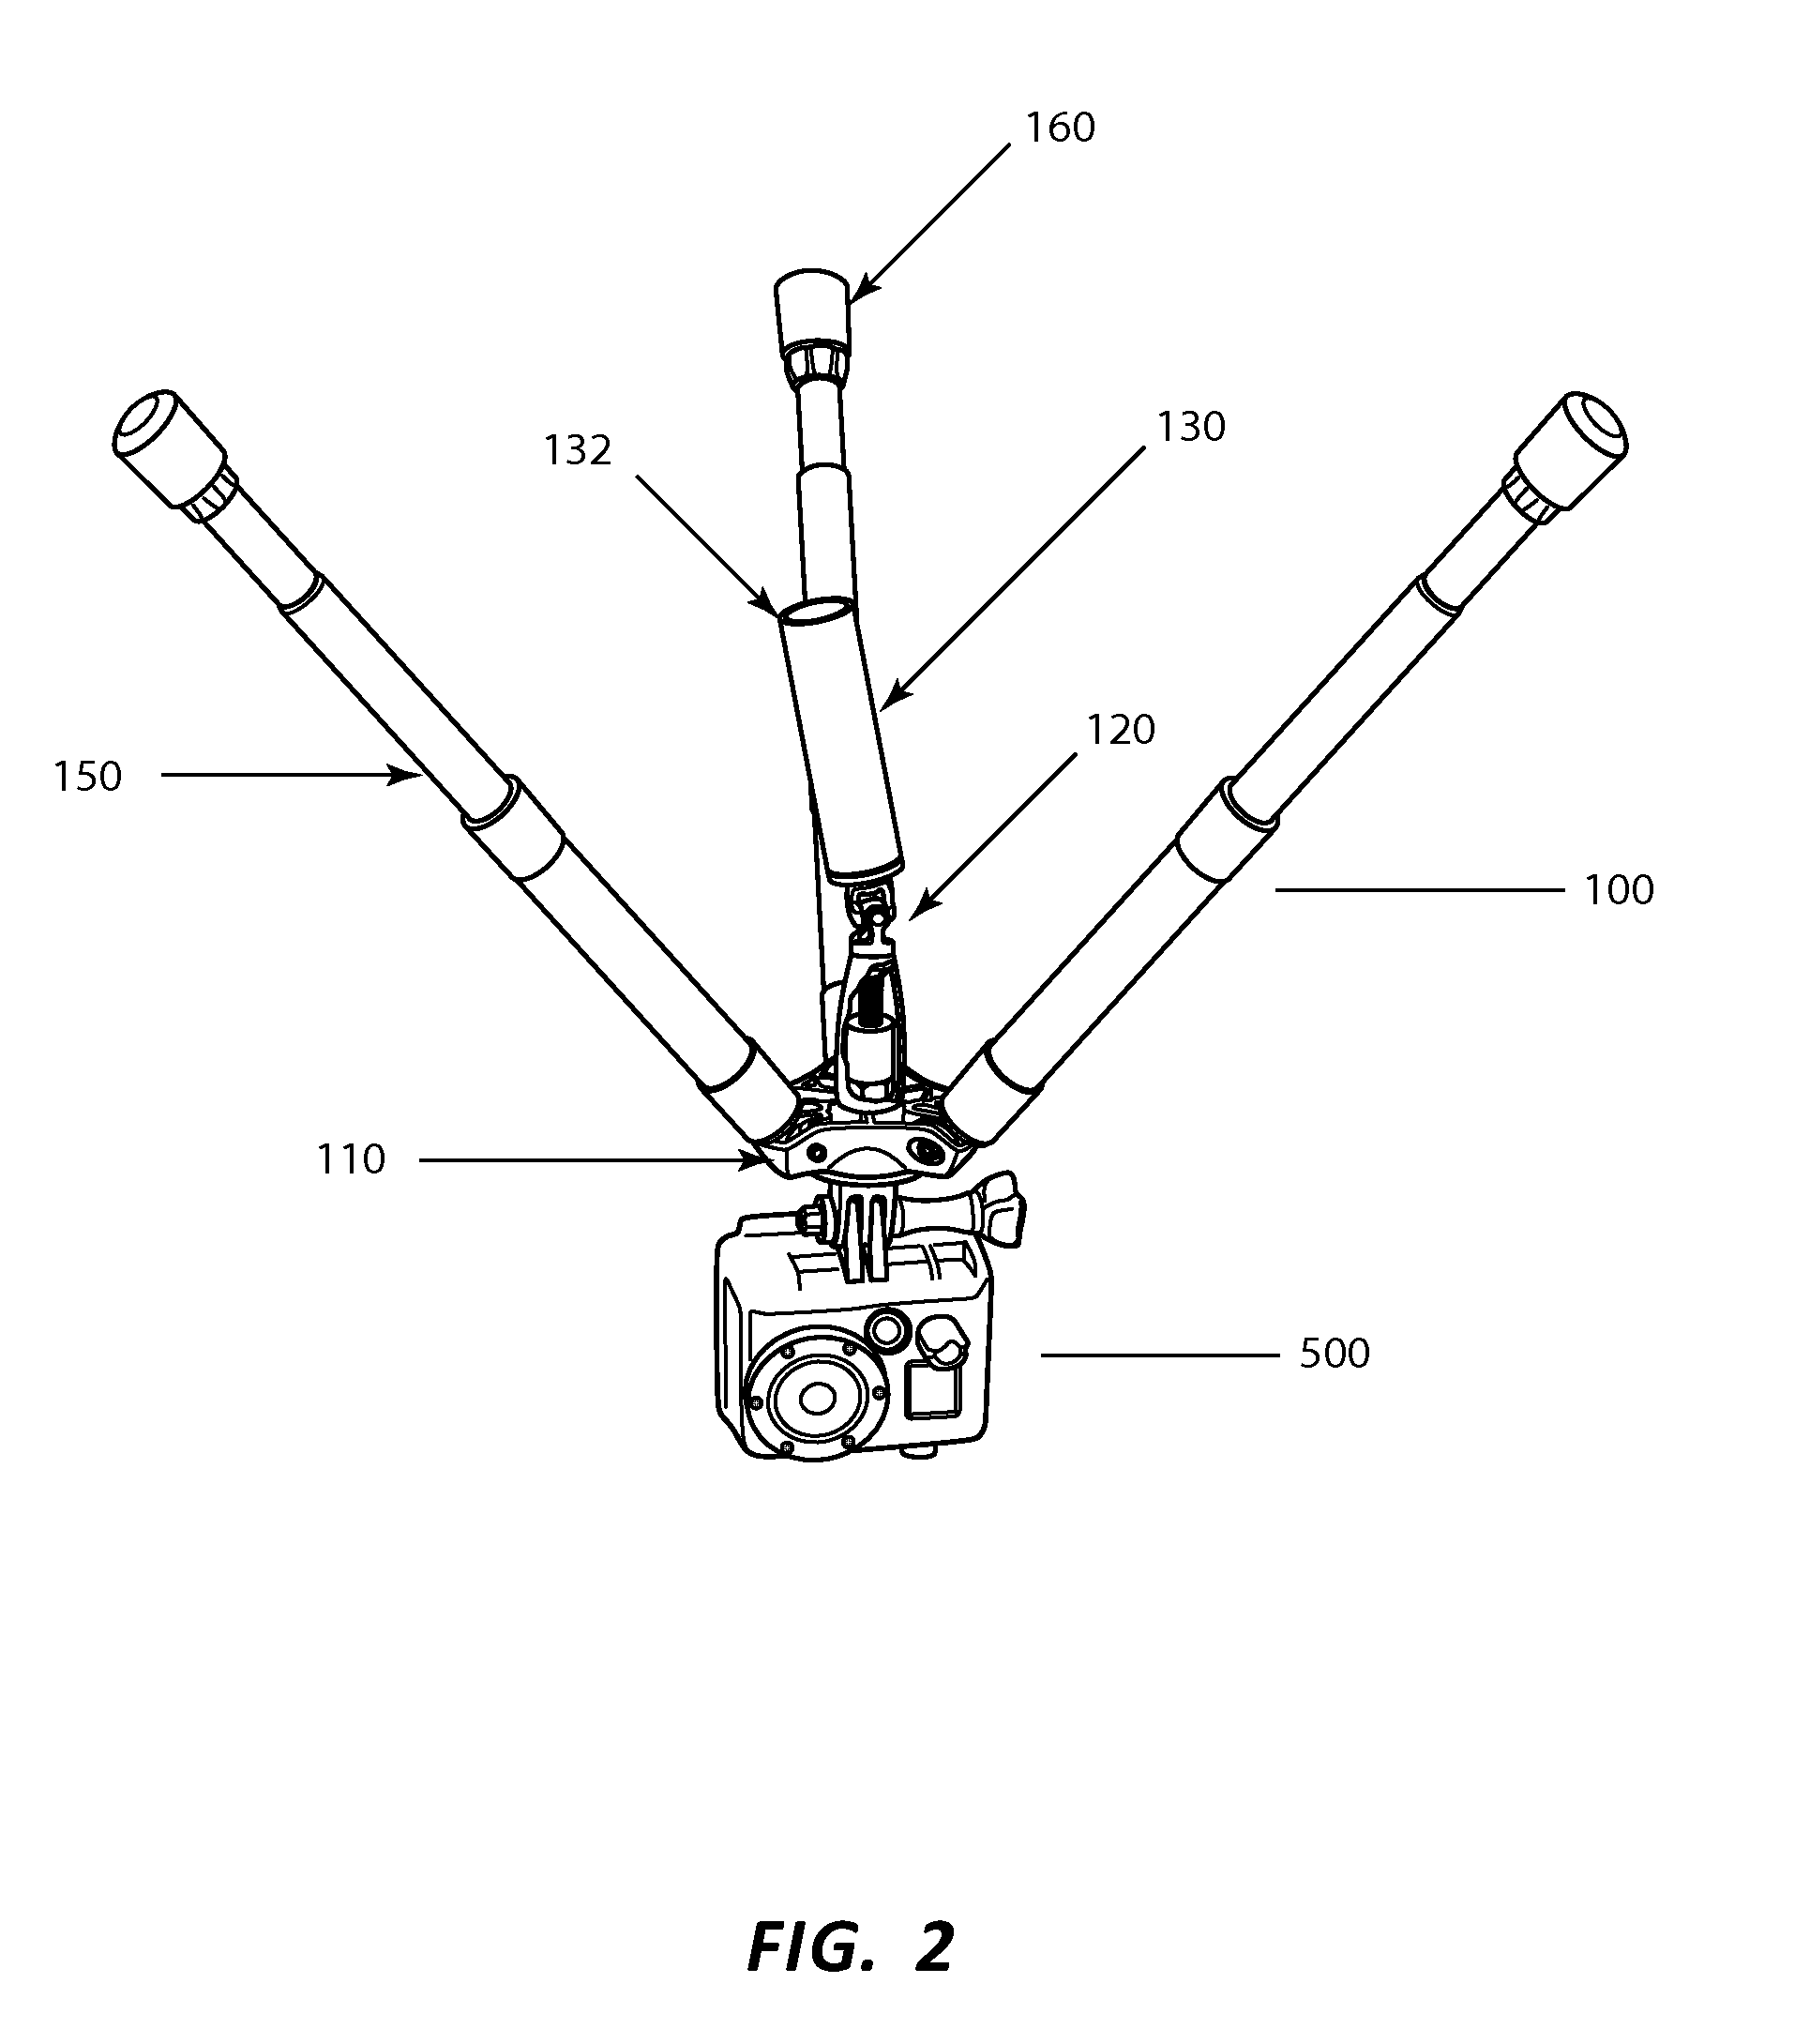 Camera stabilization apparatus and method of use